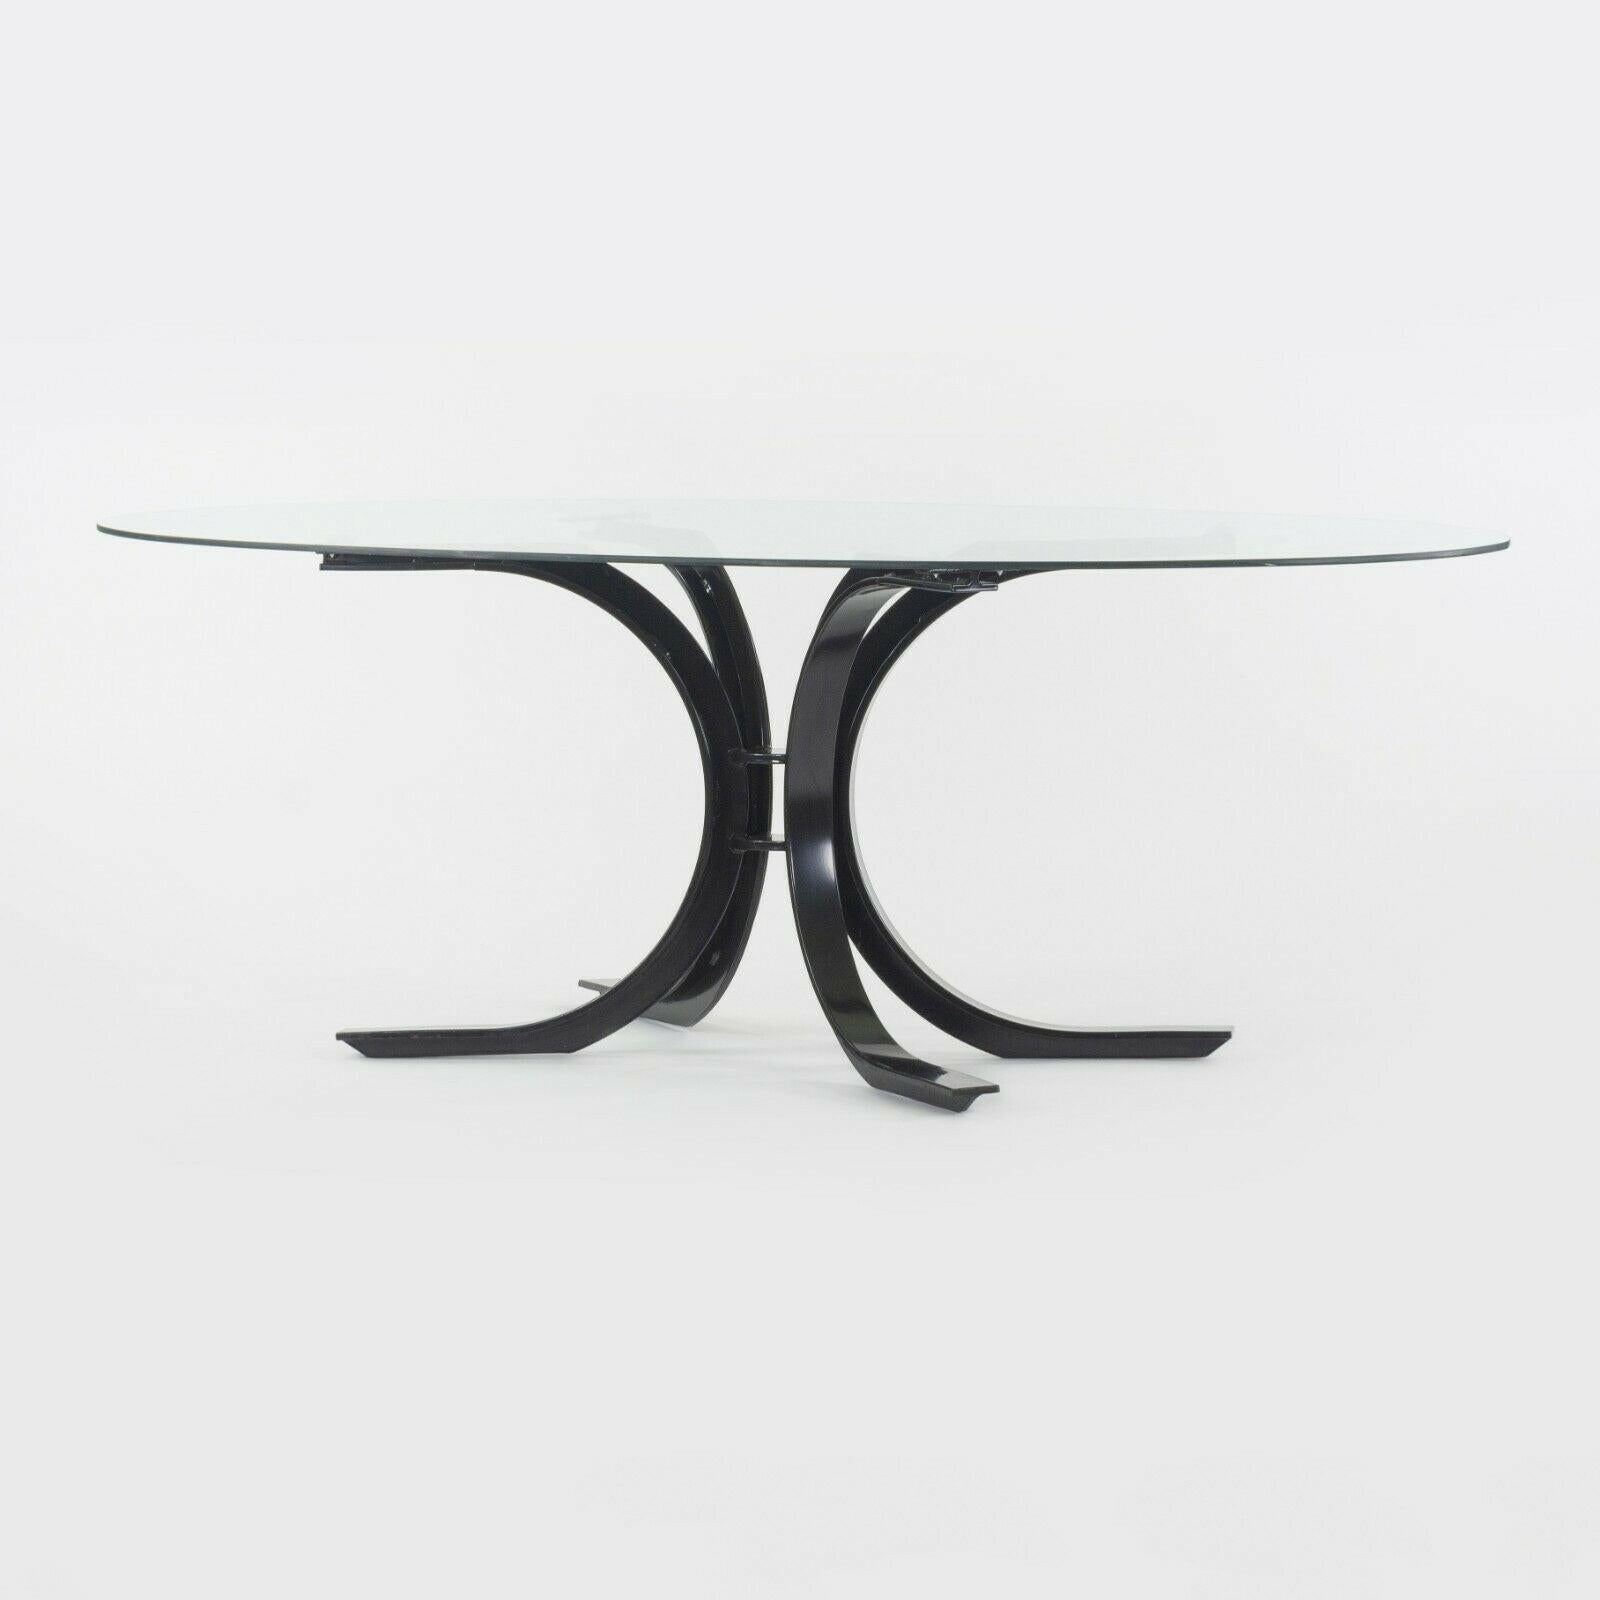 1970s Osvaldo Borsani Dining Table for Stow Davis with Glass Top and Steel Base For Sale 2